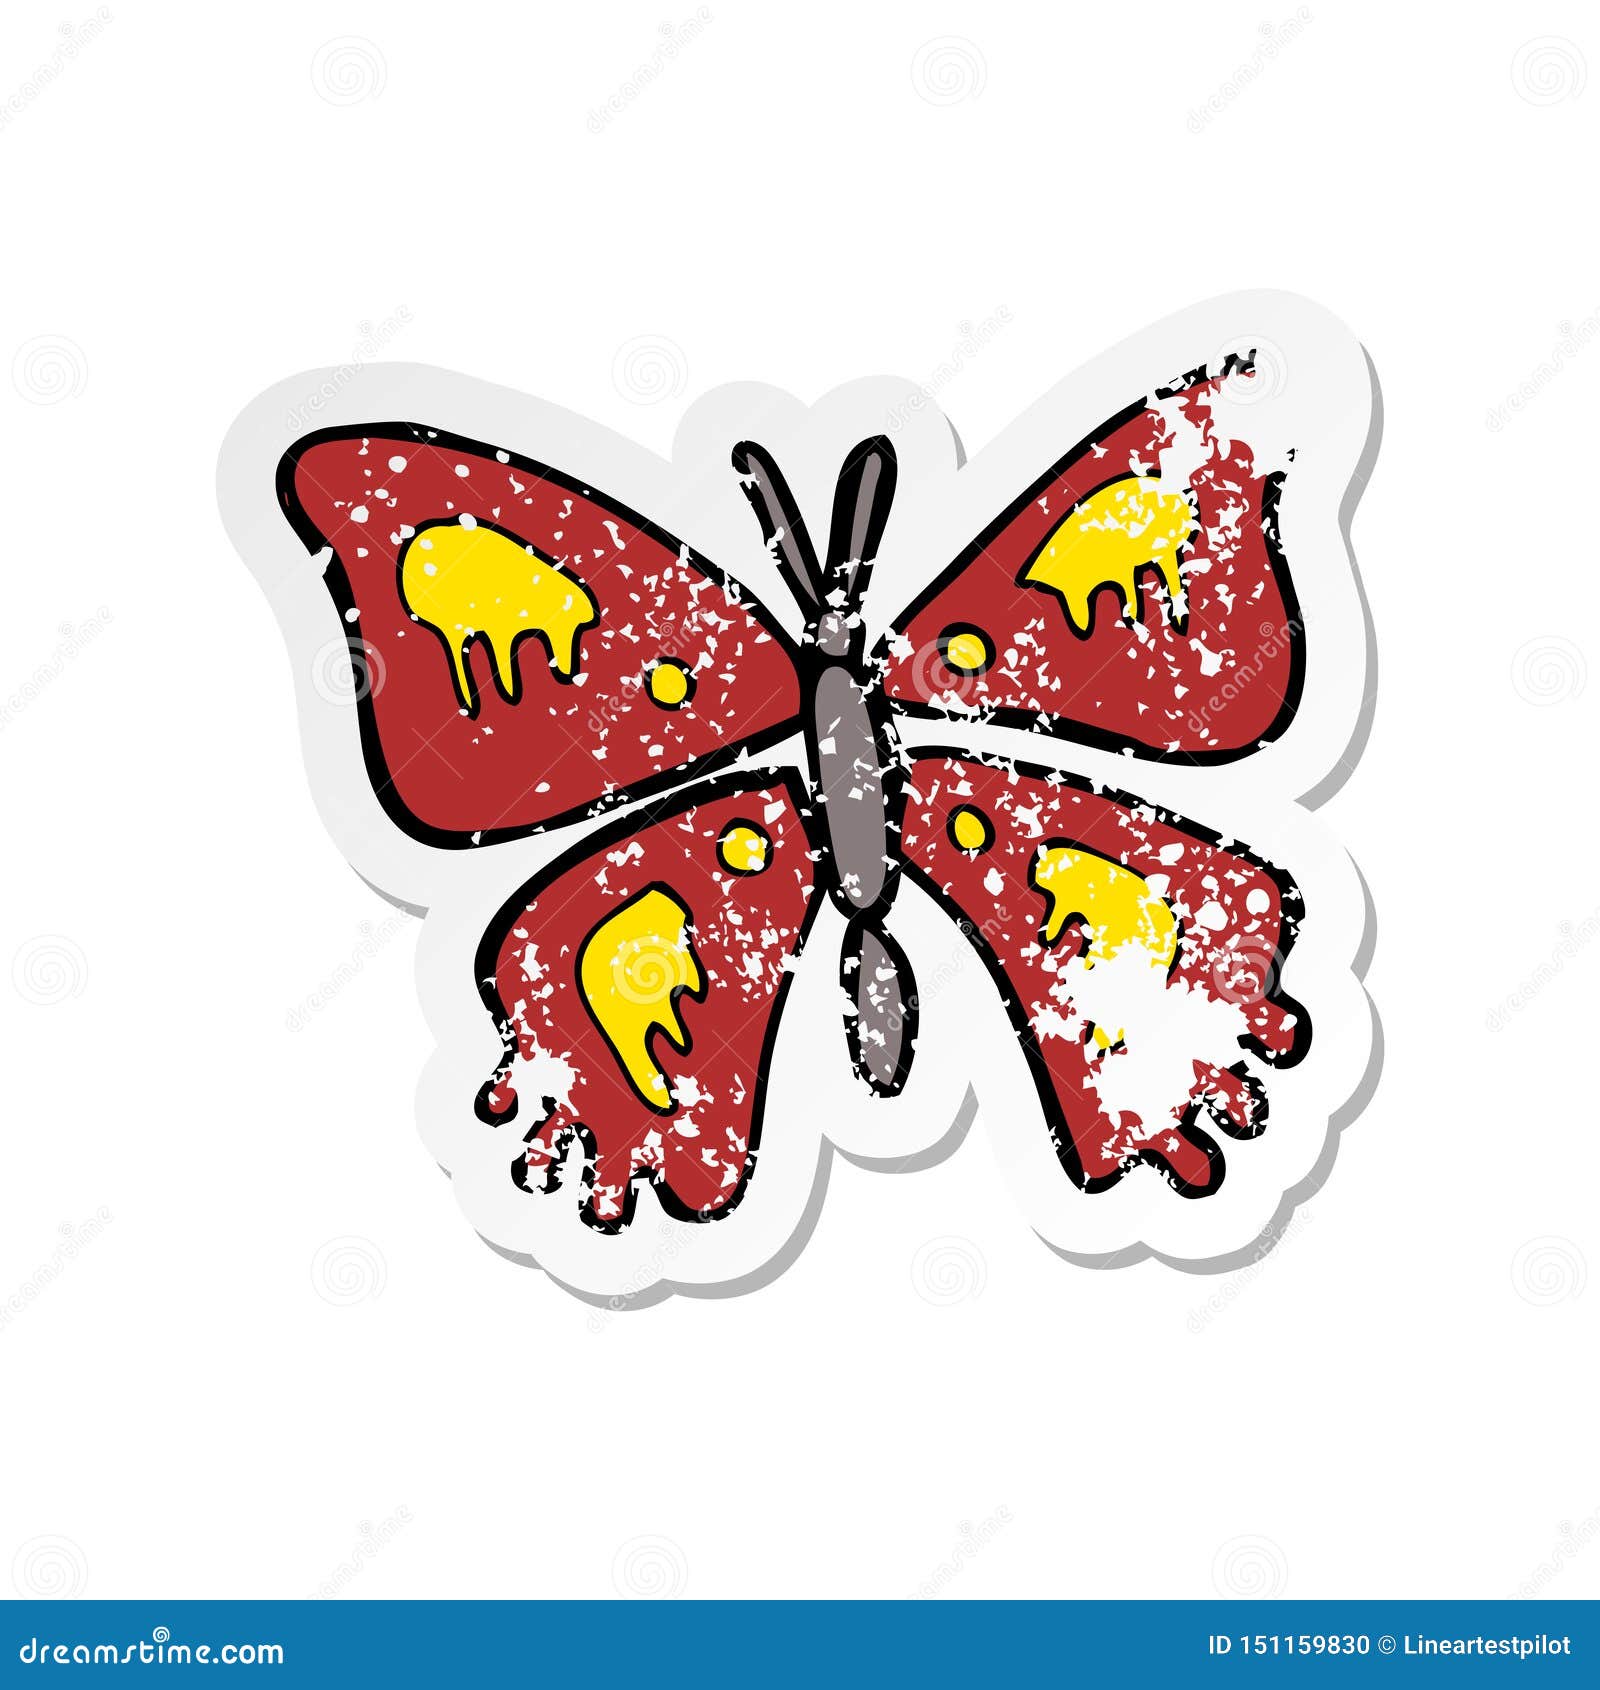 Butterfly Stickers - Red Orange